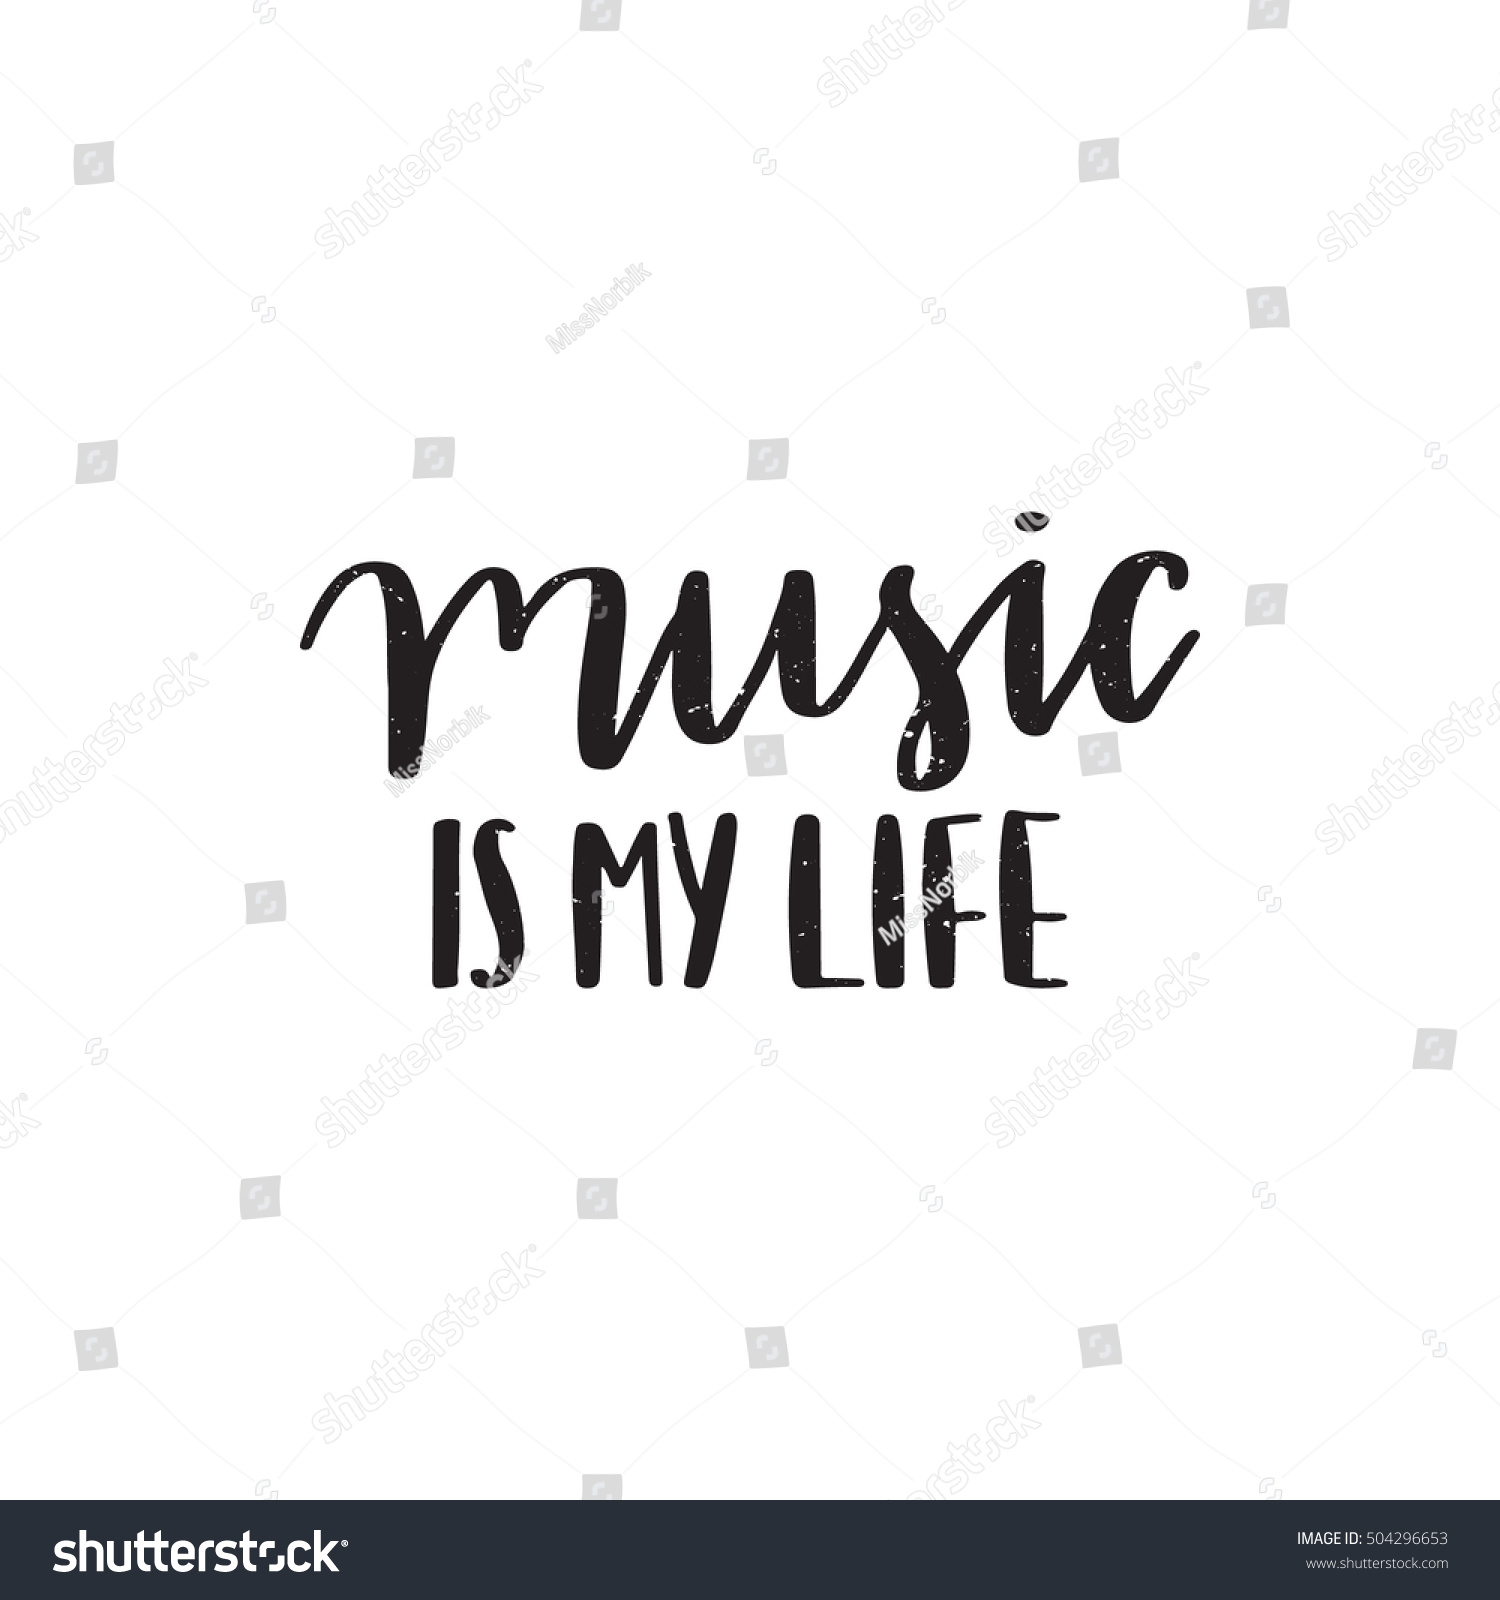 music is life quotes vector hand drawn motivational inspirational quote stock vector